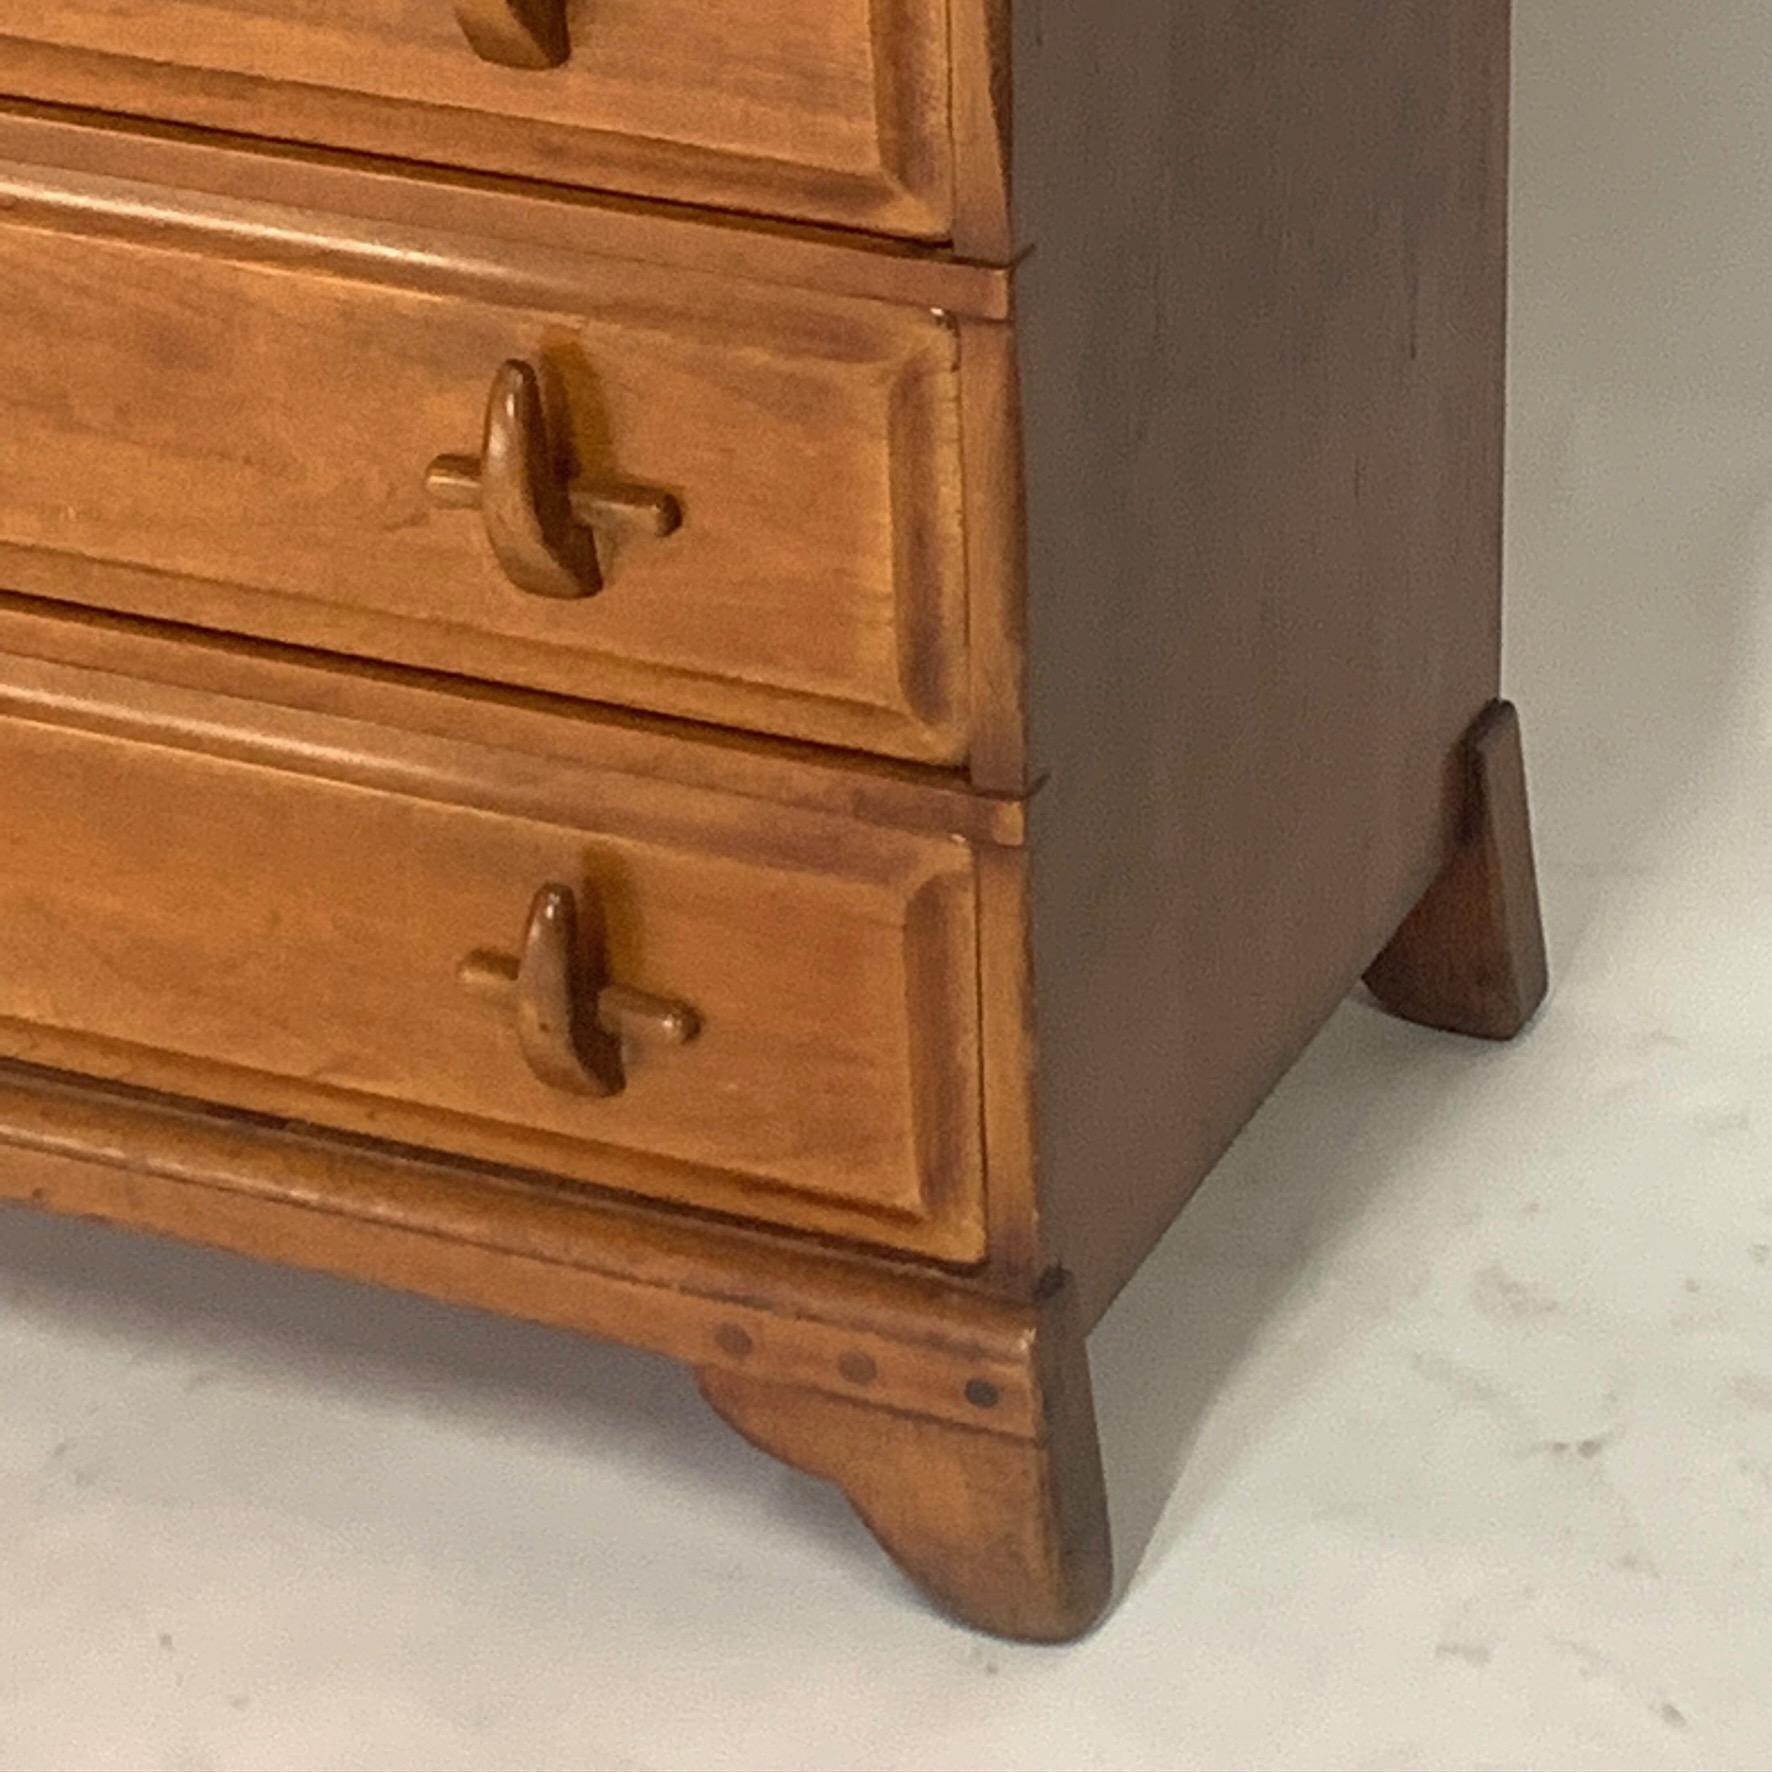 American Craft Hard Rock Maple 4 Drawer Dresser with Sculptural Pulls by Sikes In Good Condition In Hudson, NY